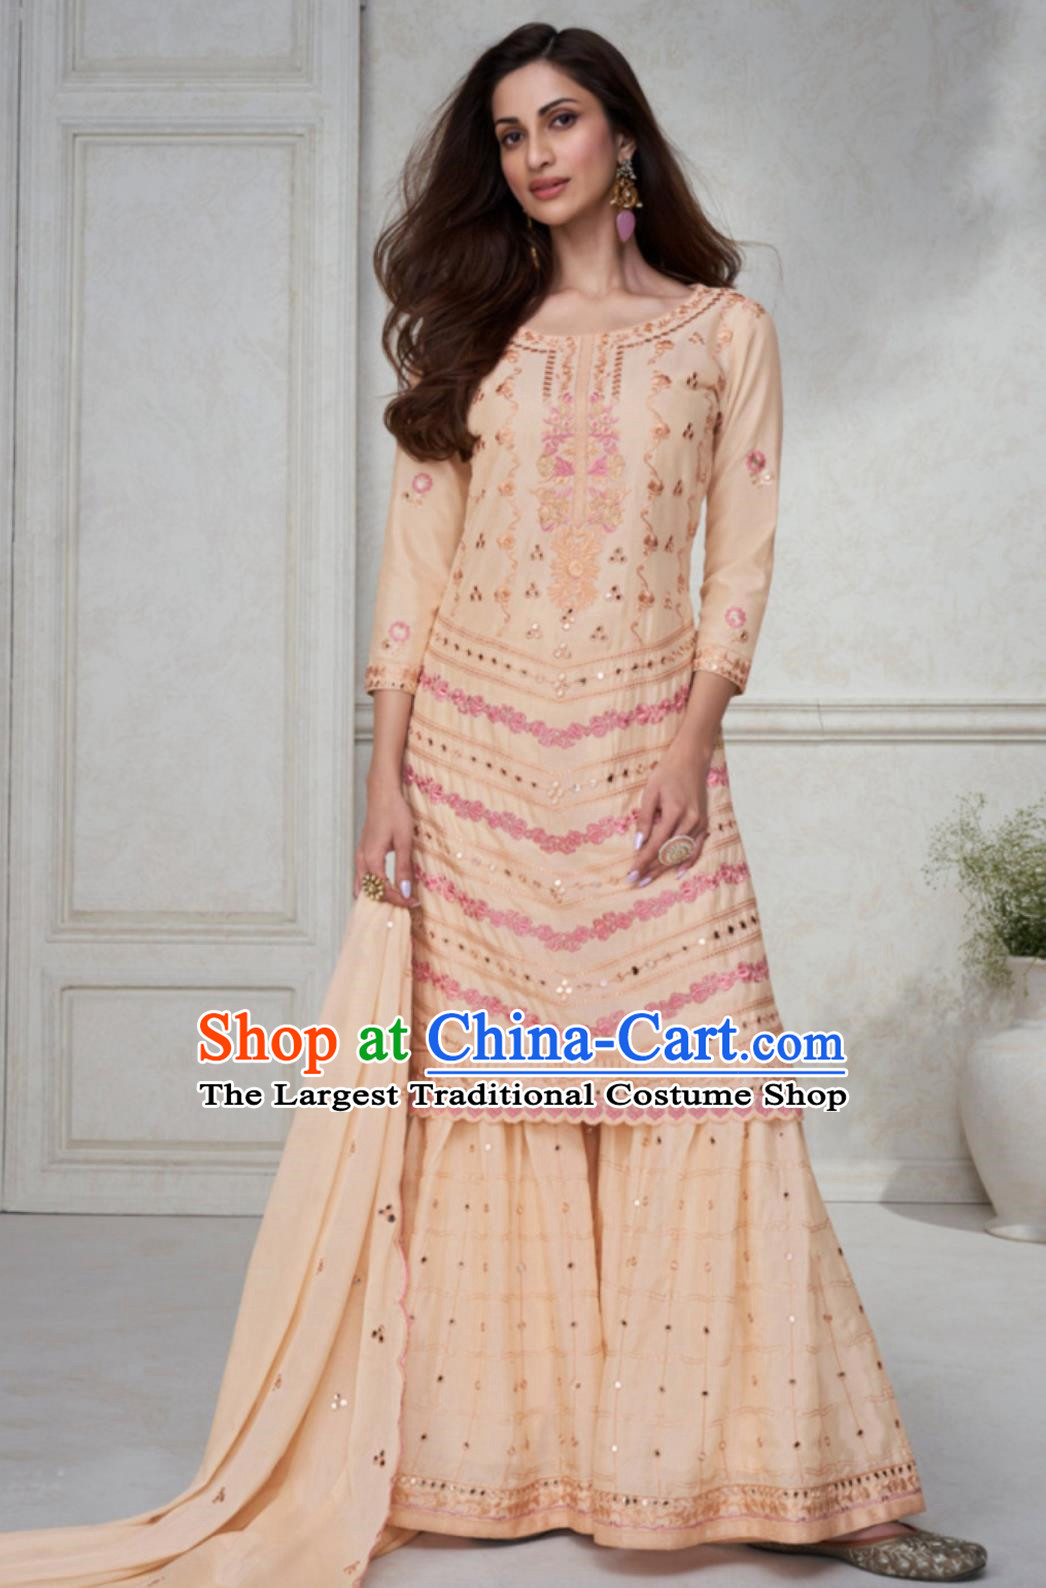 Peach Pink Indian Panchabi Three Piece National Embroidered Traditional Women Clothes